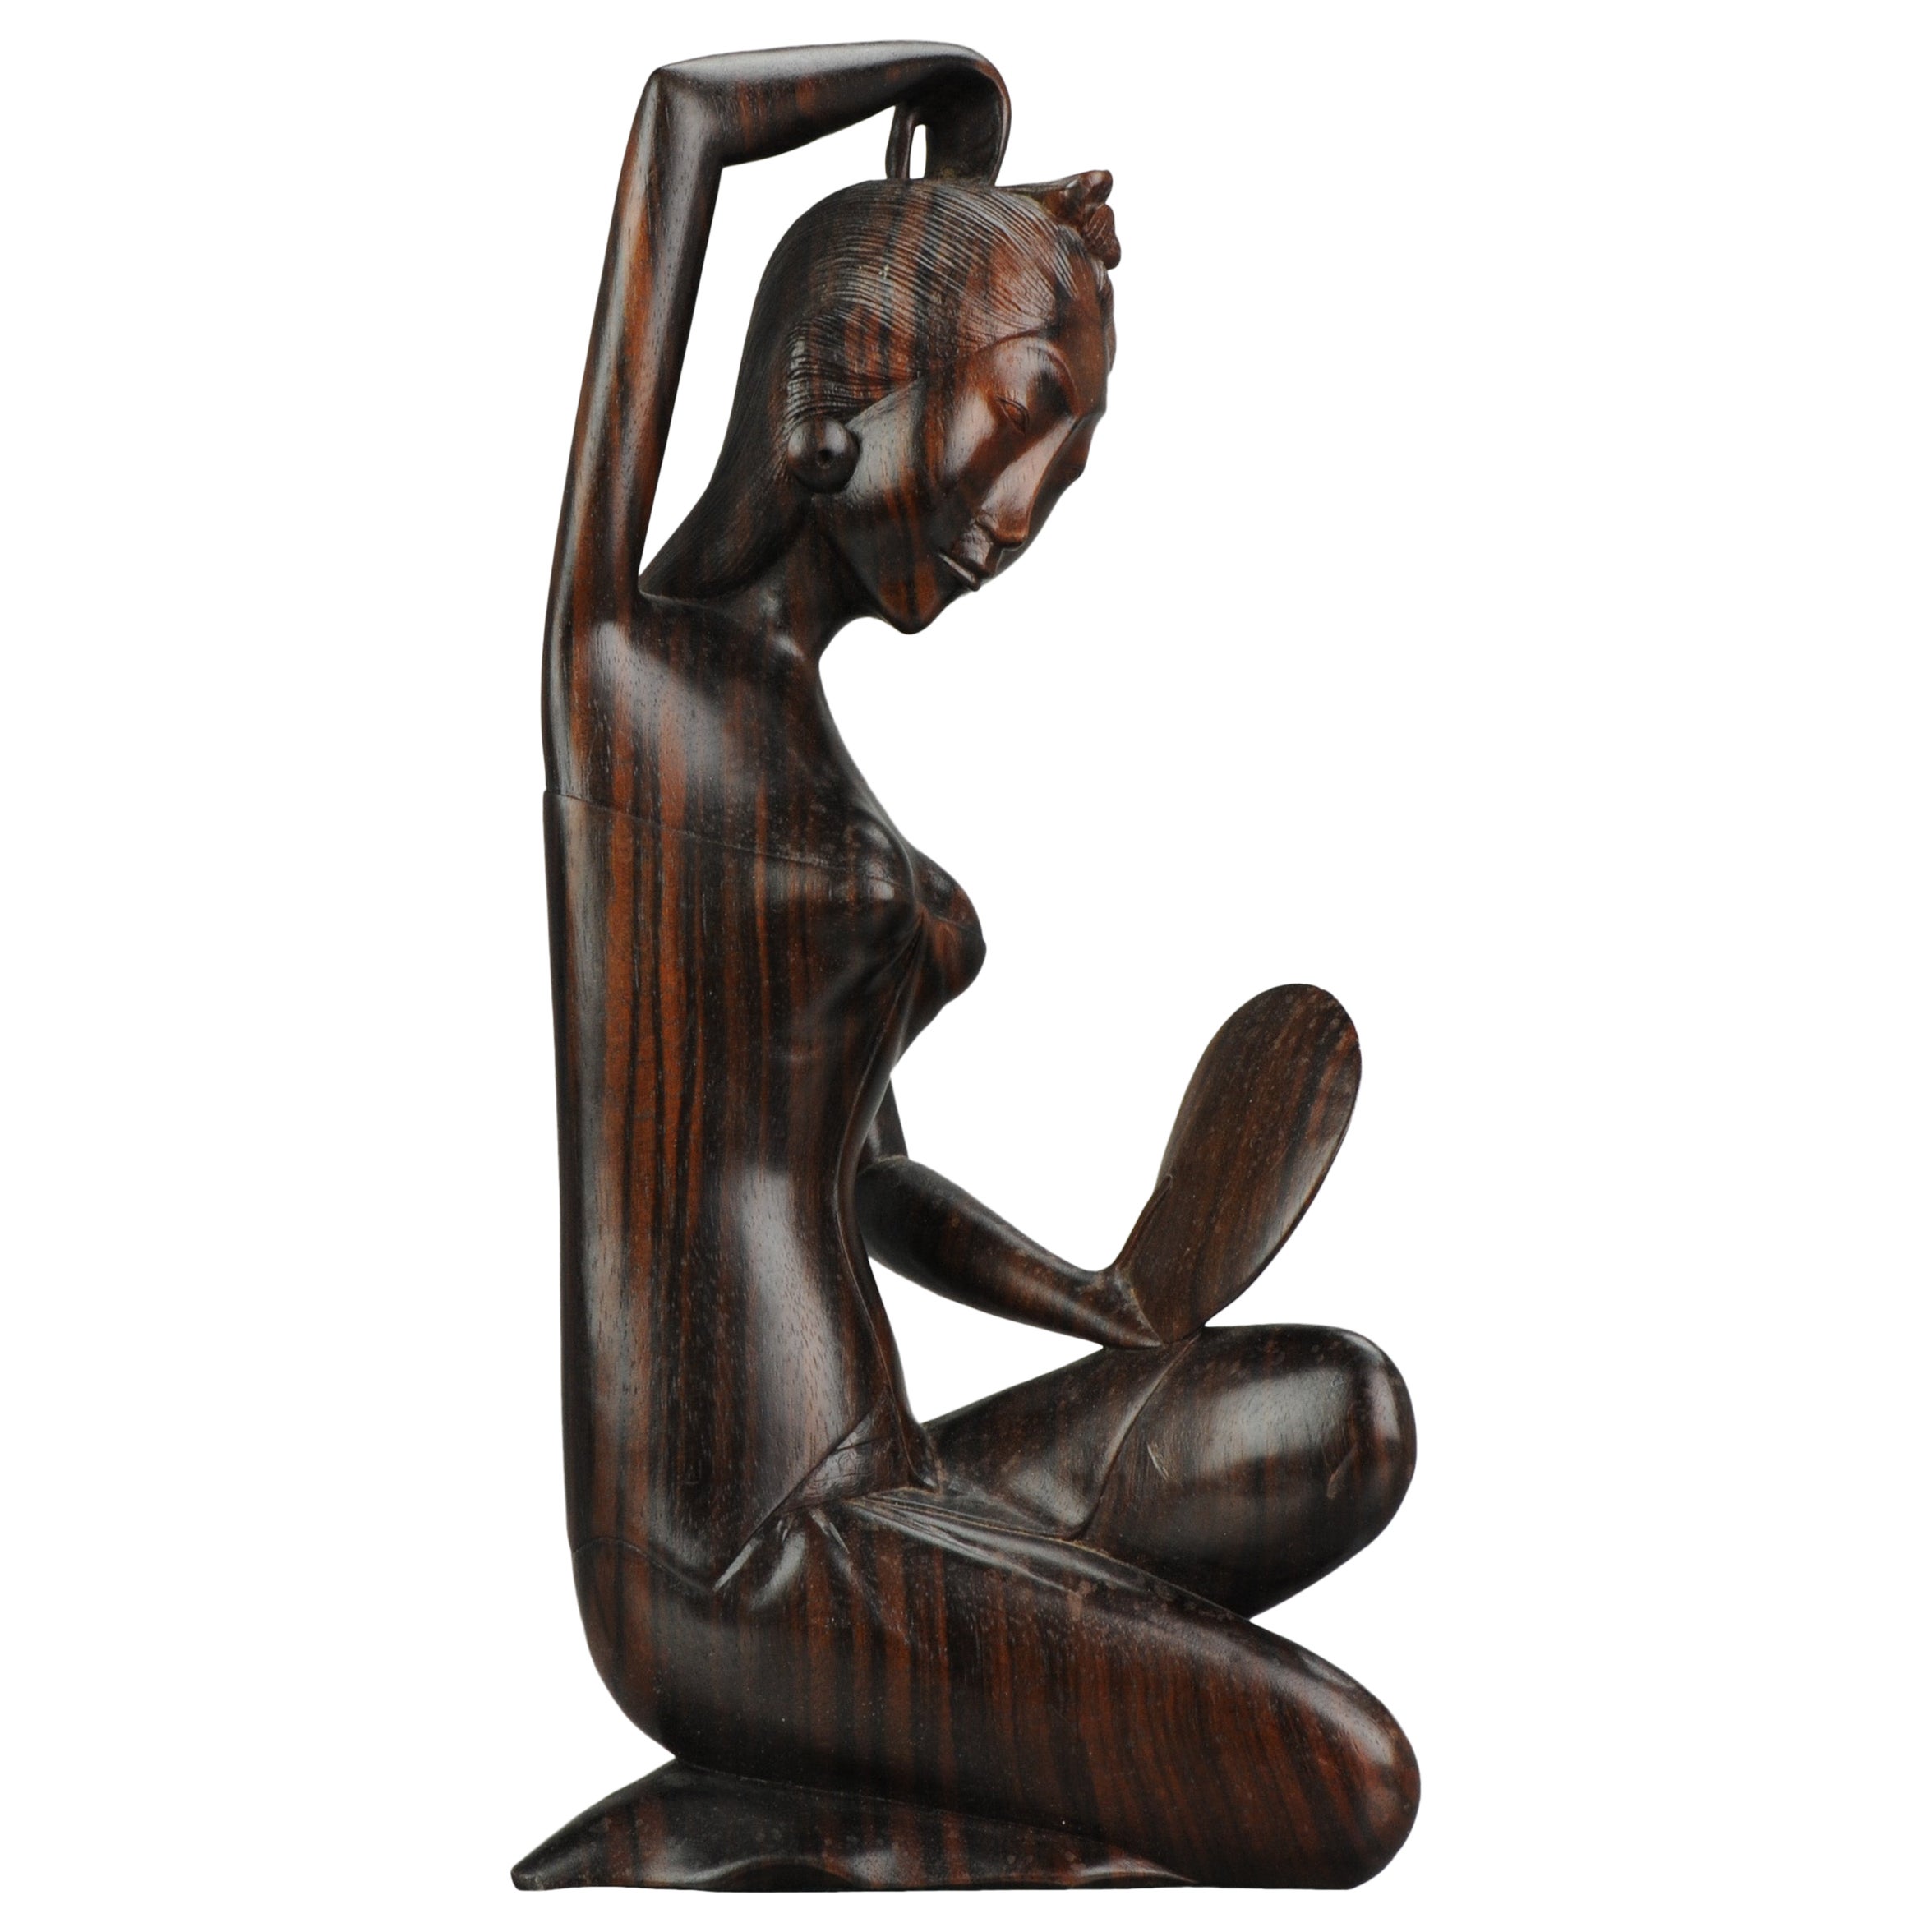 Balinese Carved Wood Statues of a Naked Lady Great Carving, 1950 20th Century